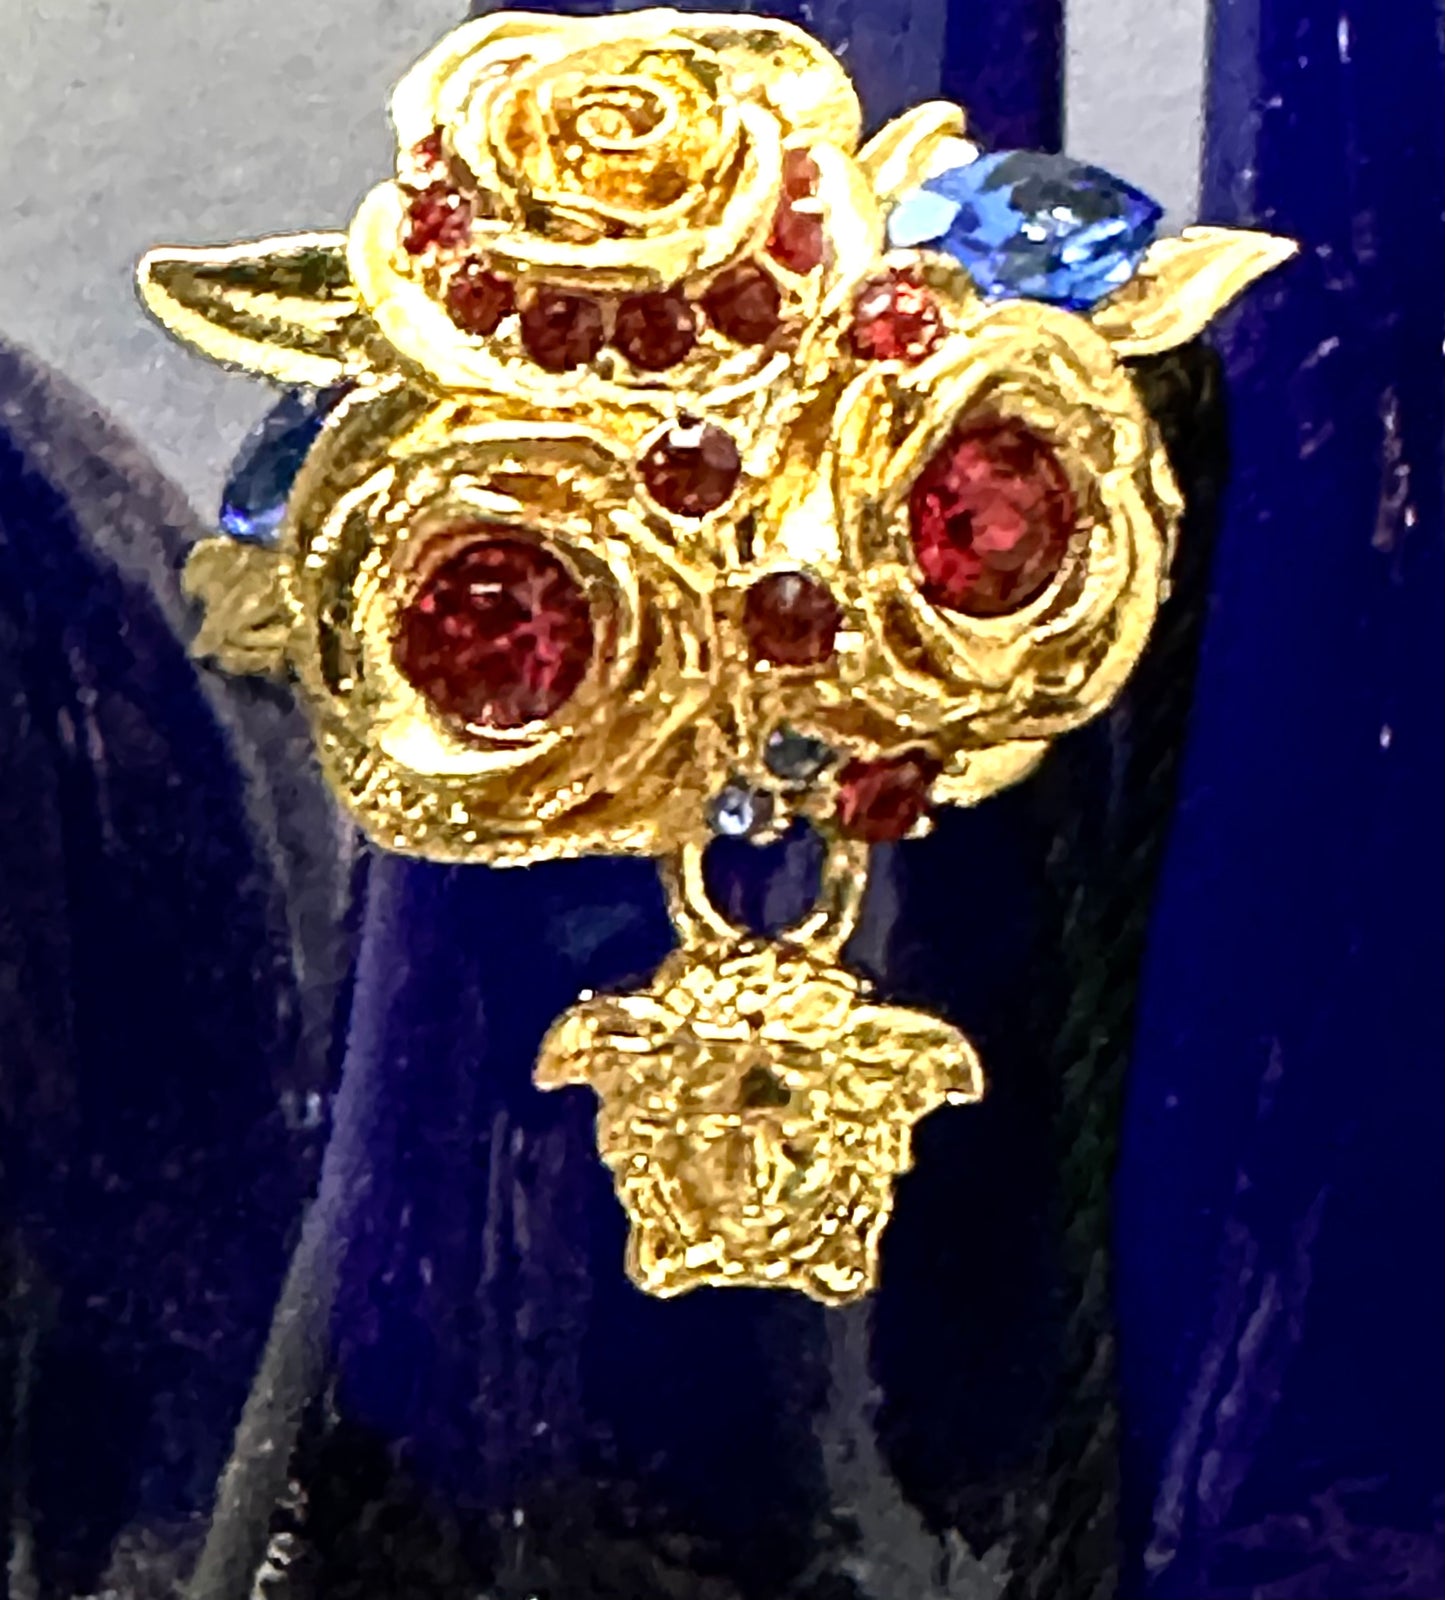 Versace gold plated floral ring with medusa charm and colorful rhinestones, BNWT boxed